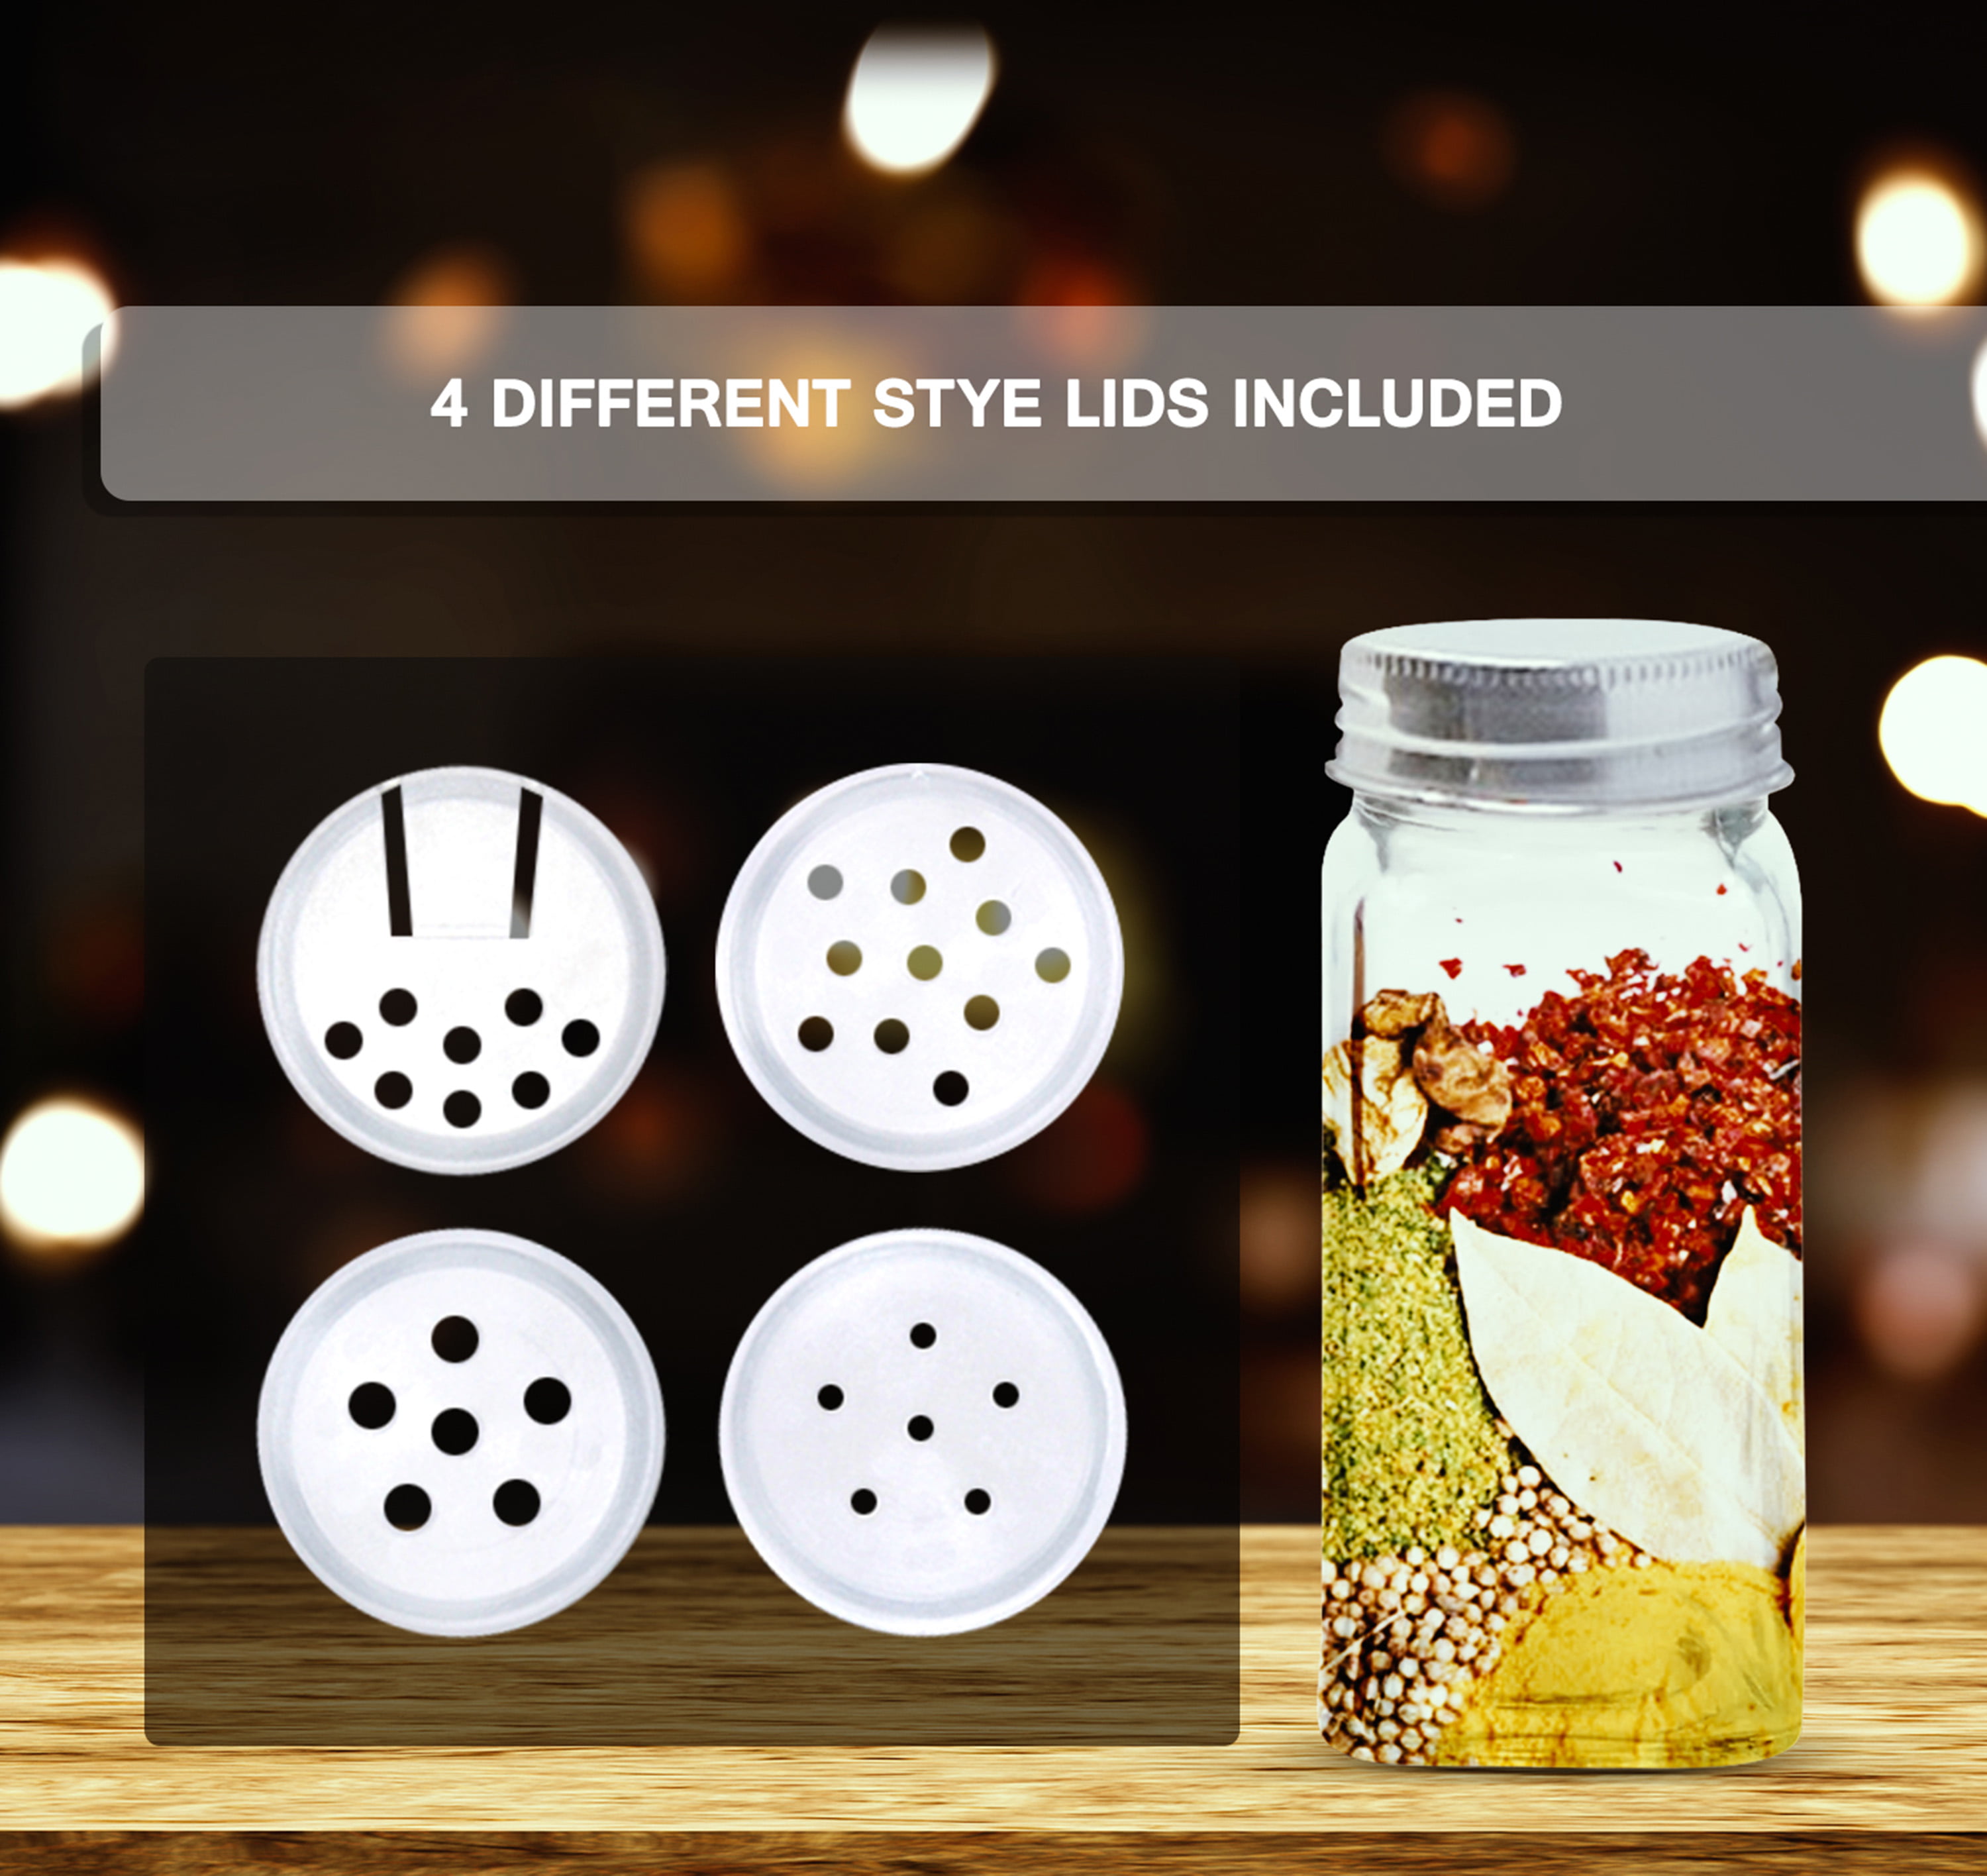 36 Spice Jars with 547 Labels - Glass Spice Jars with Shaker Lids - 4 oz Square Spice Cont